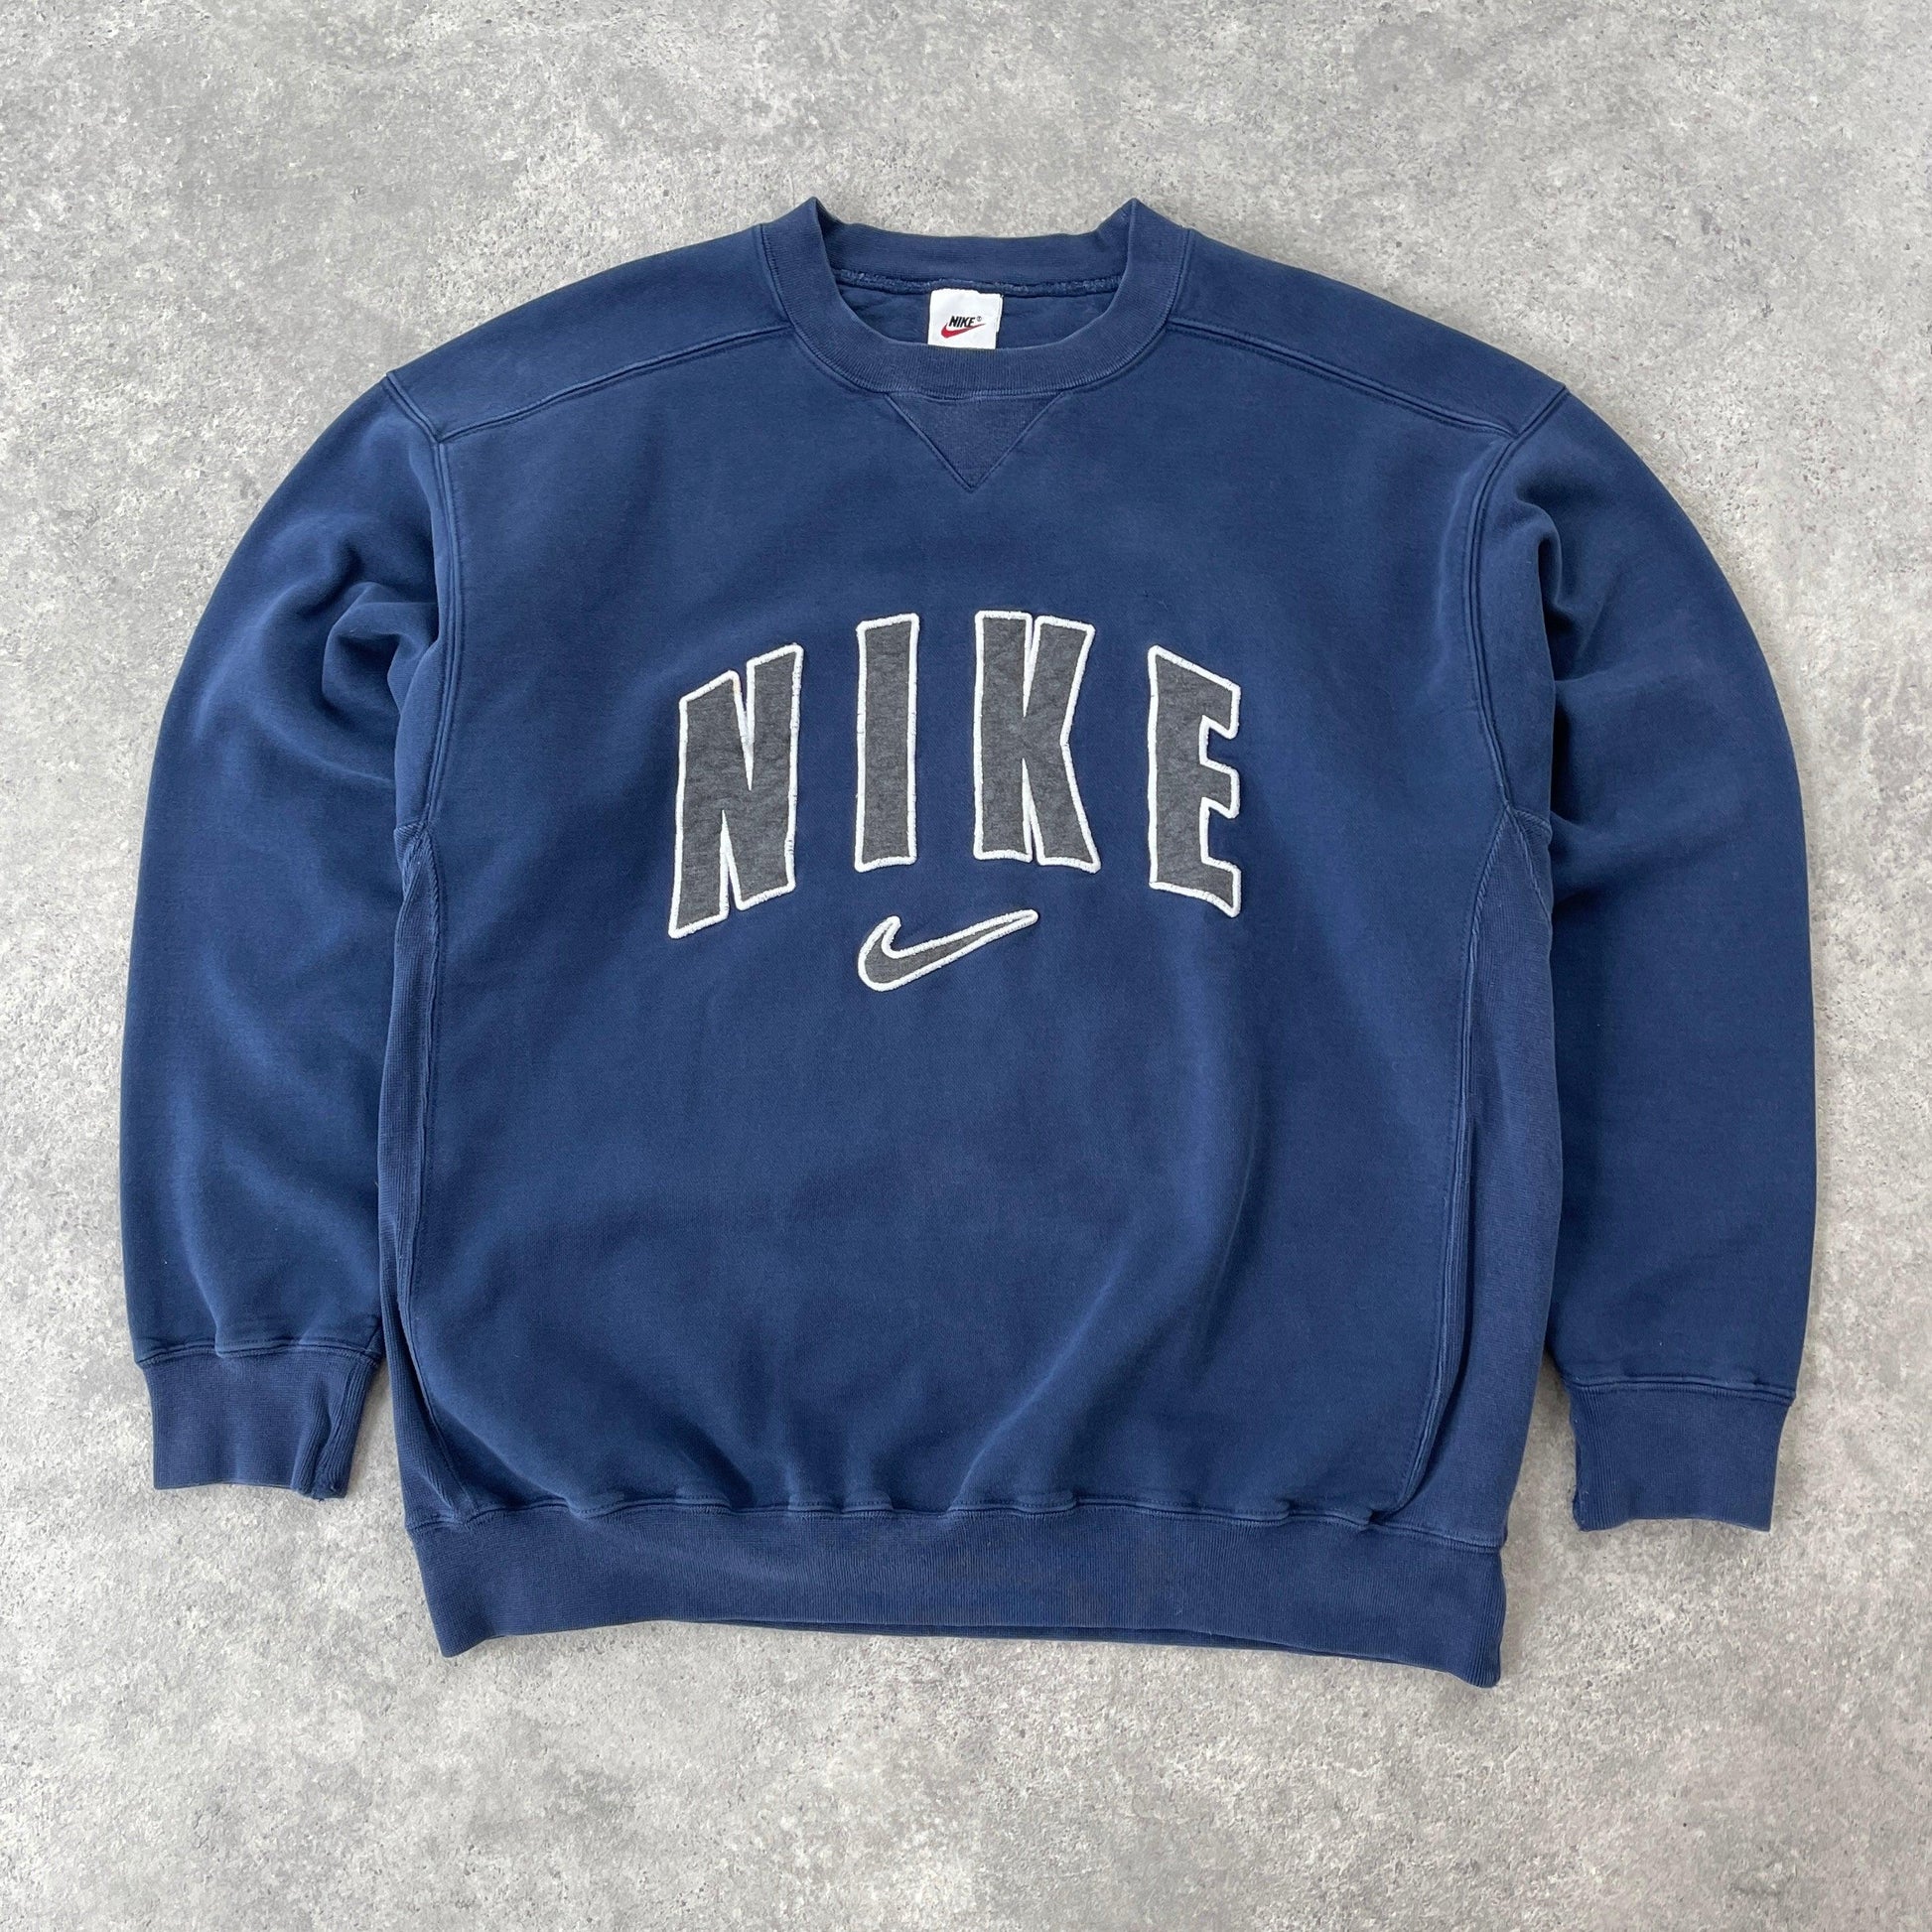 Nike RARE 1990s heavyweight embroidered spellout sweatshirt (L) - Known Source